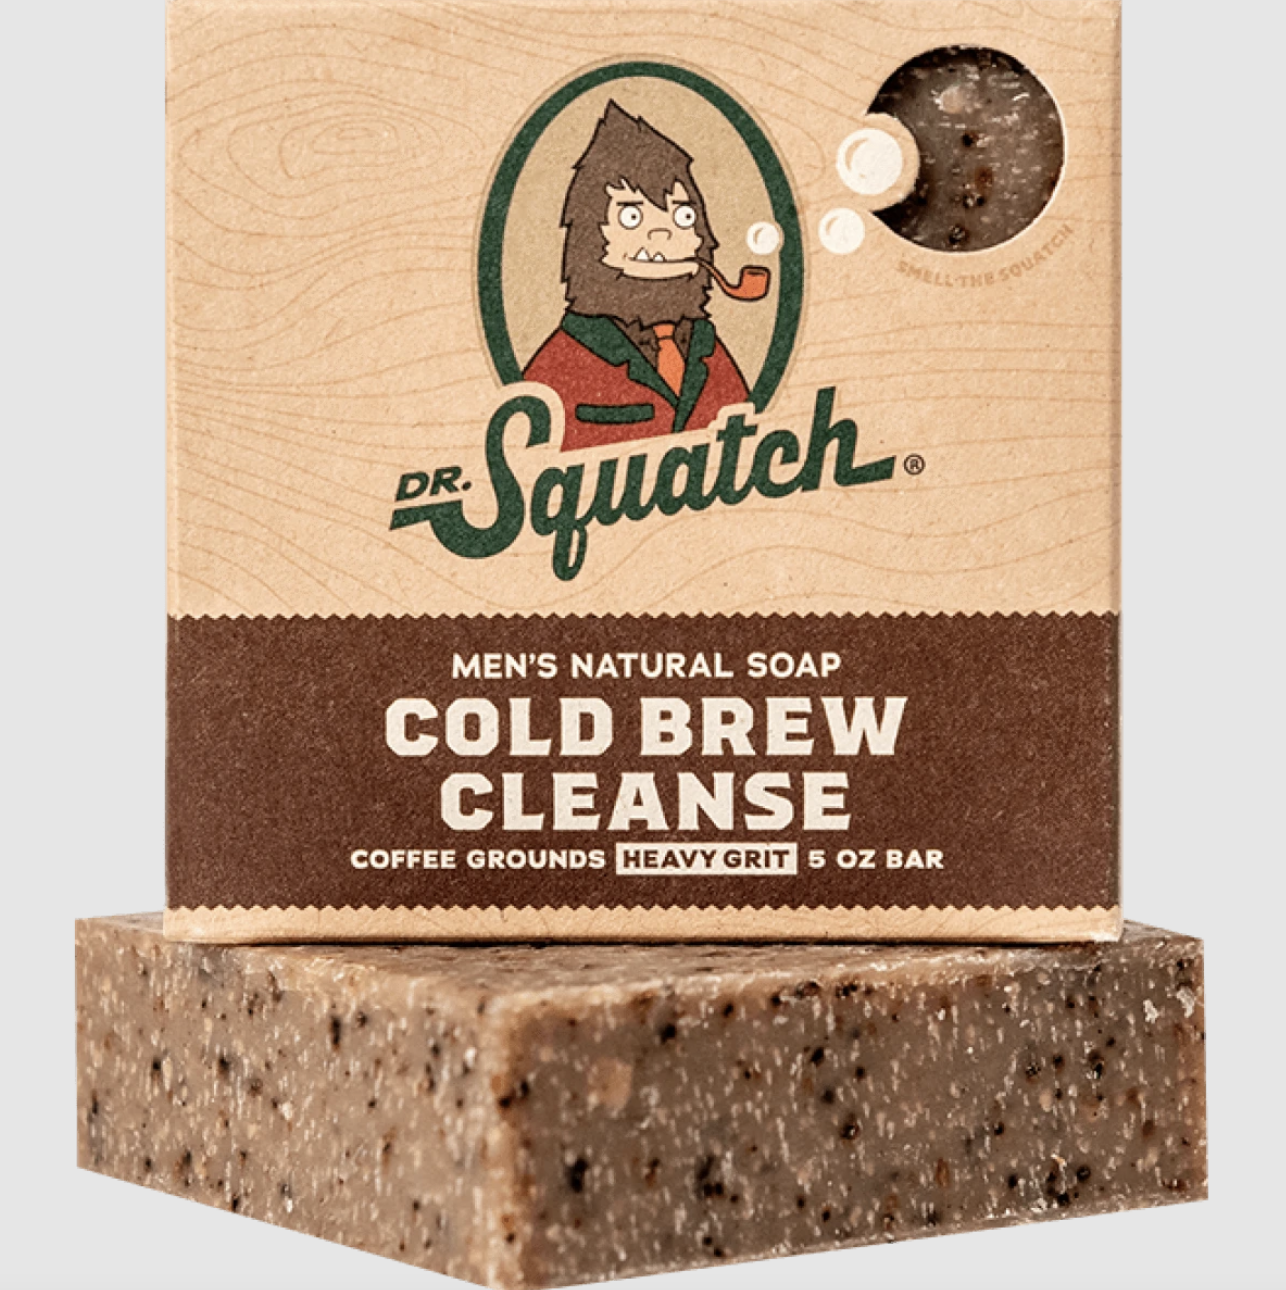 cold brew cleanse soap